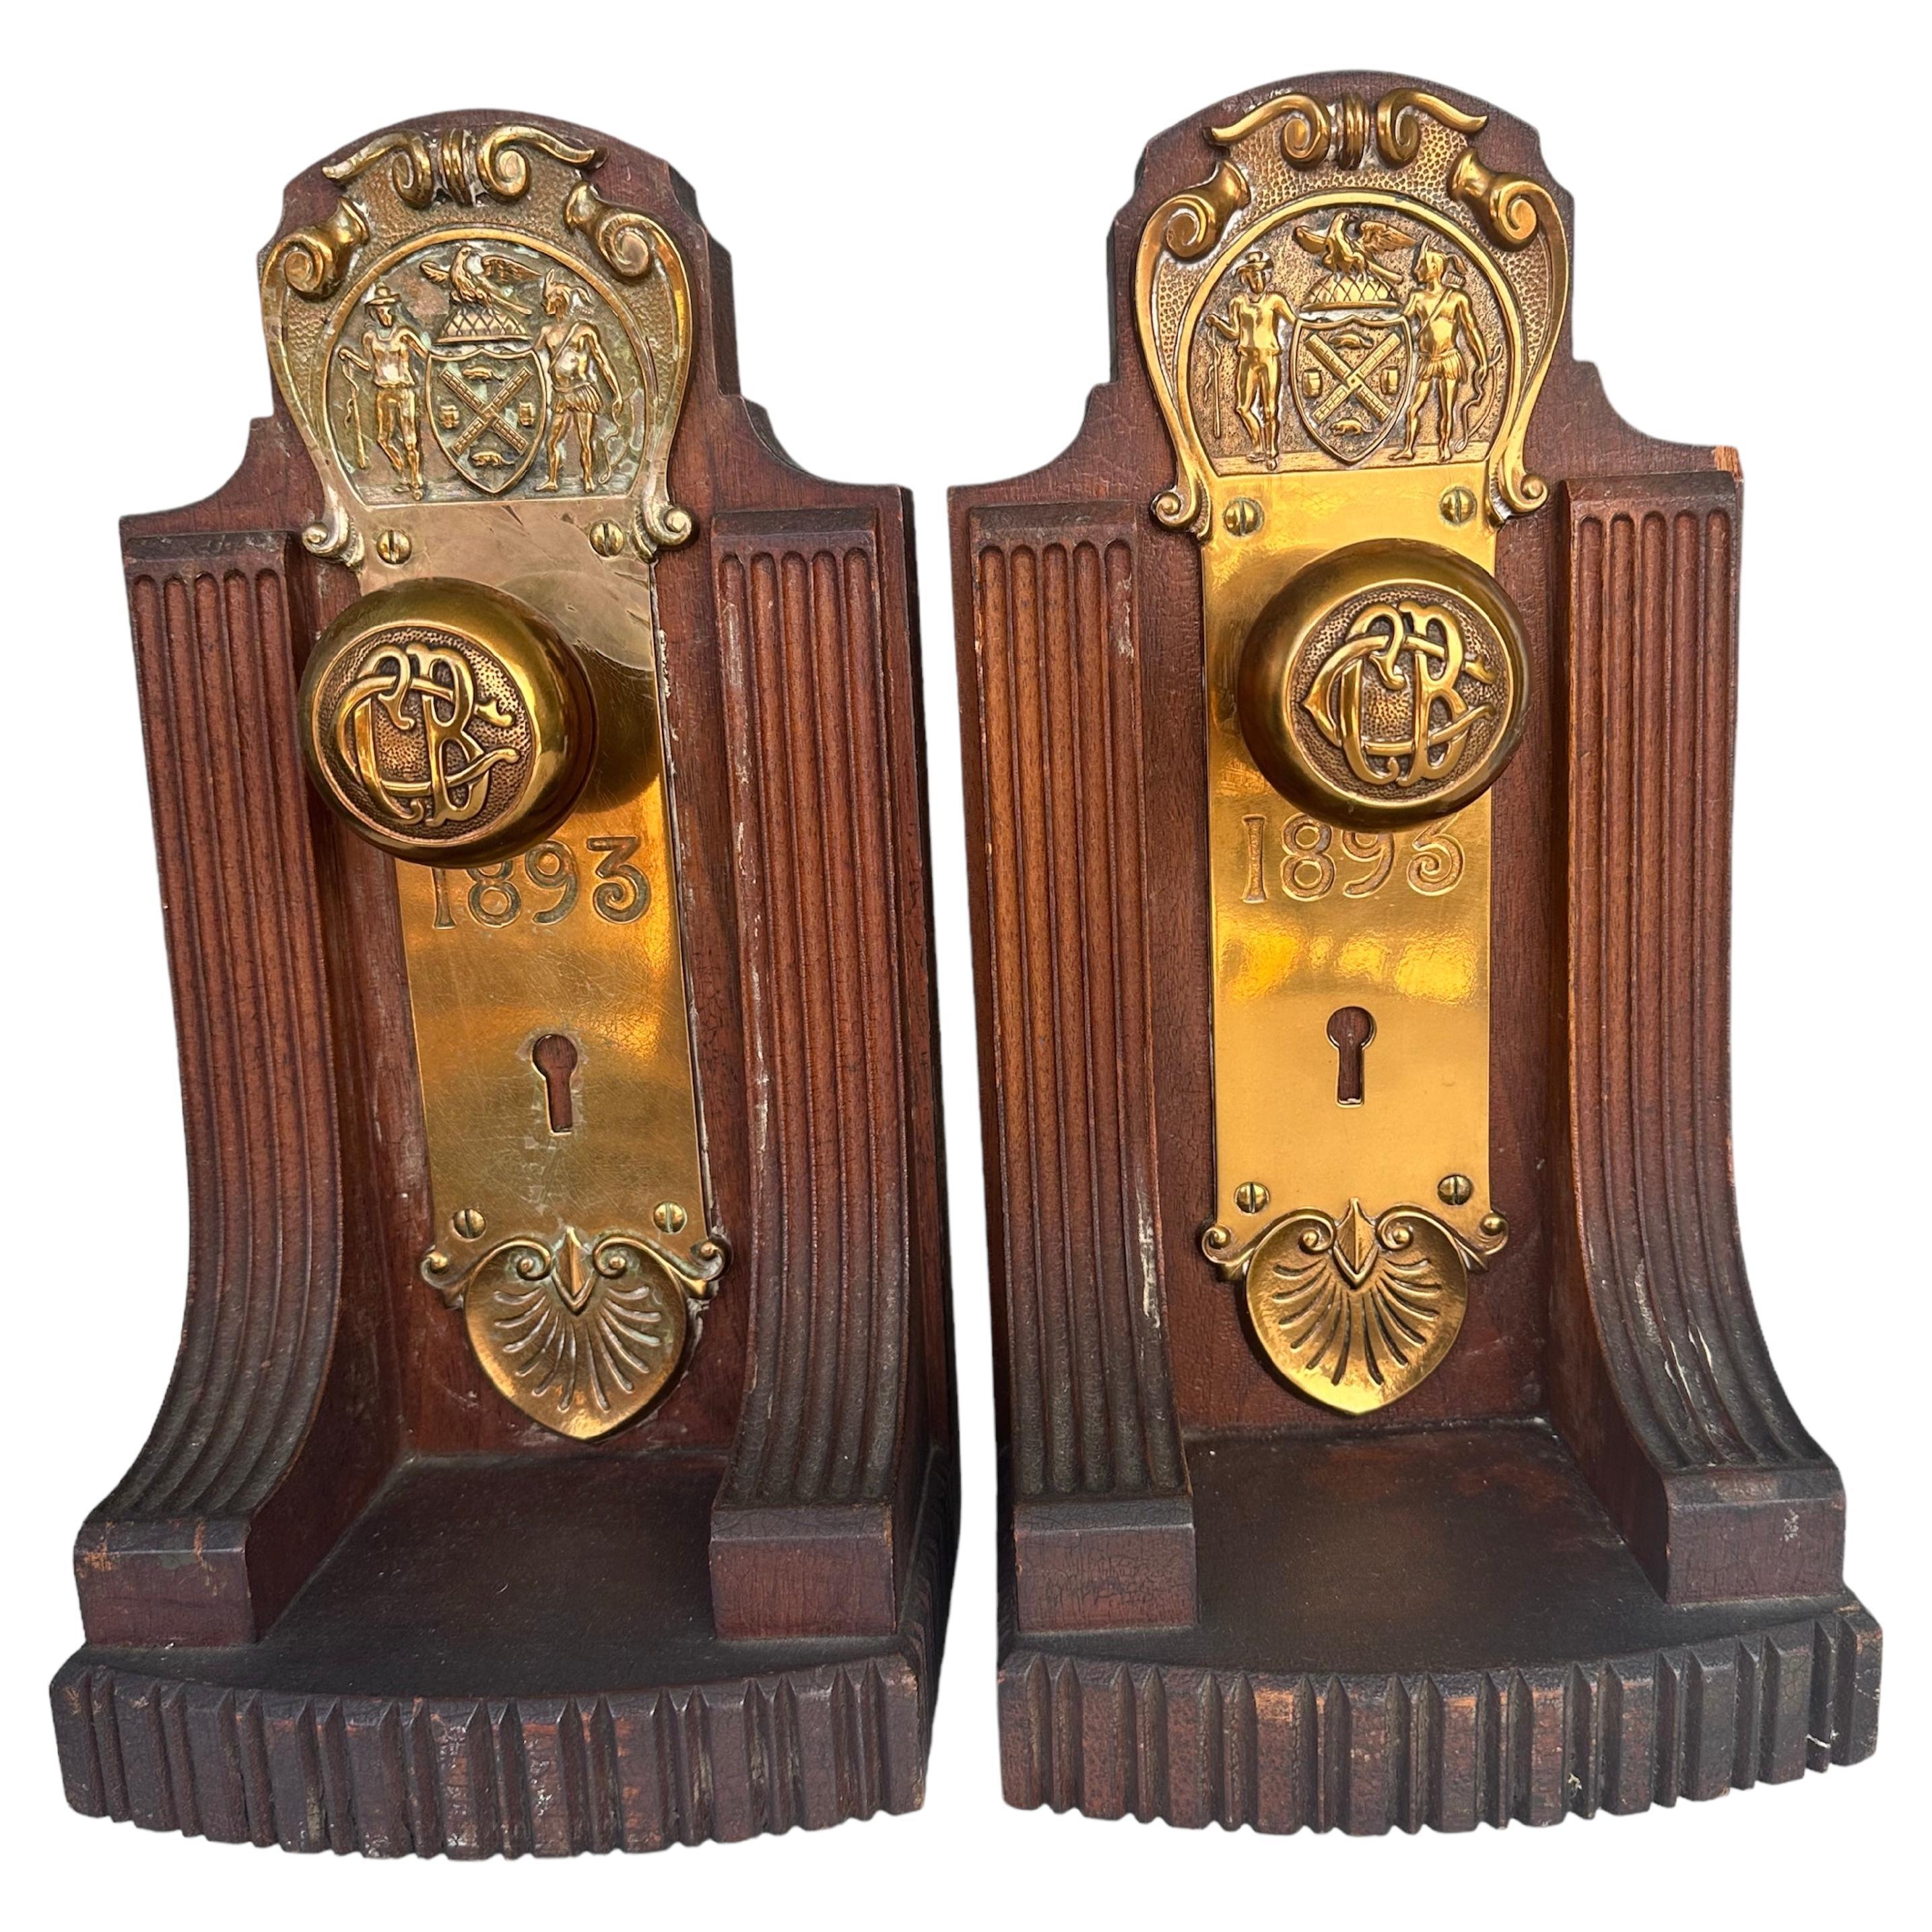 Custom Made Book Ends with Brass Door-knobs of NYC Official Seal Dated 1895